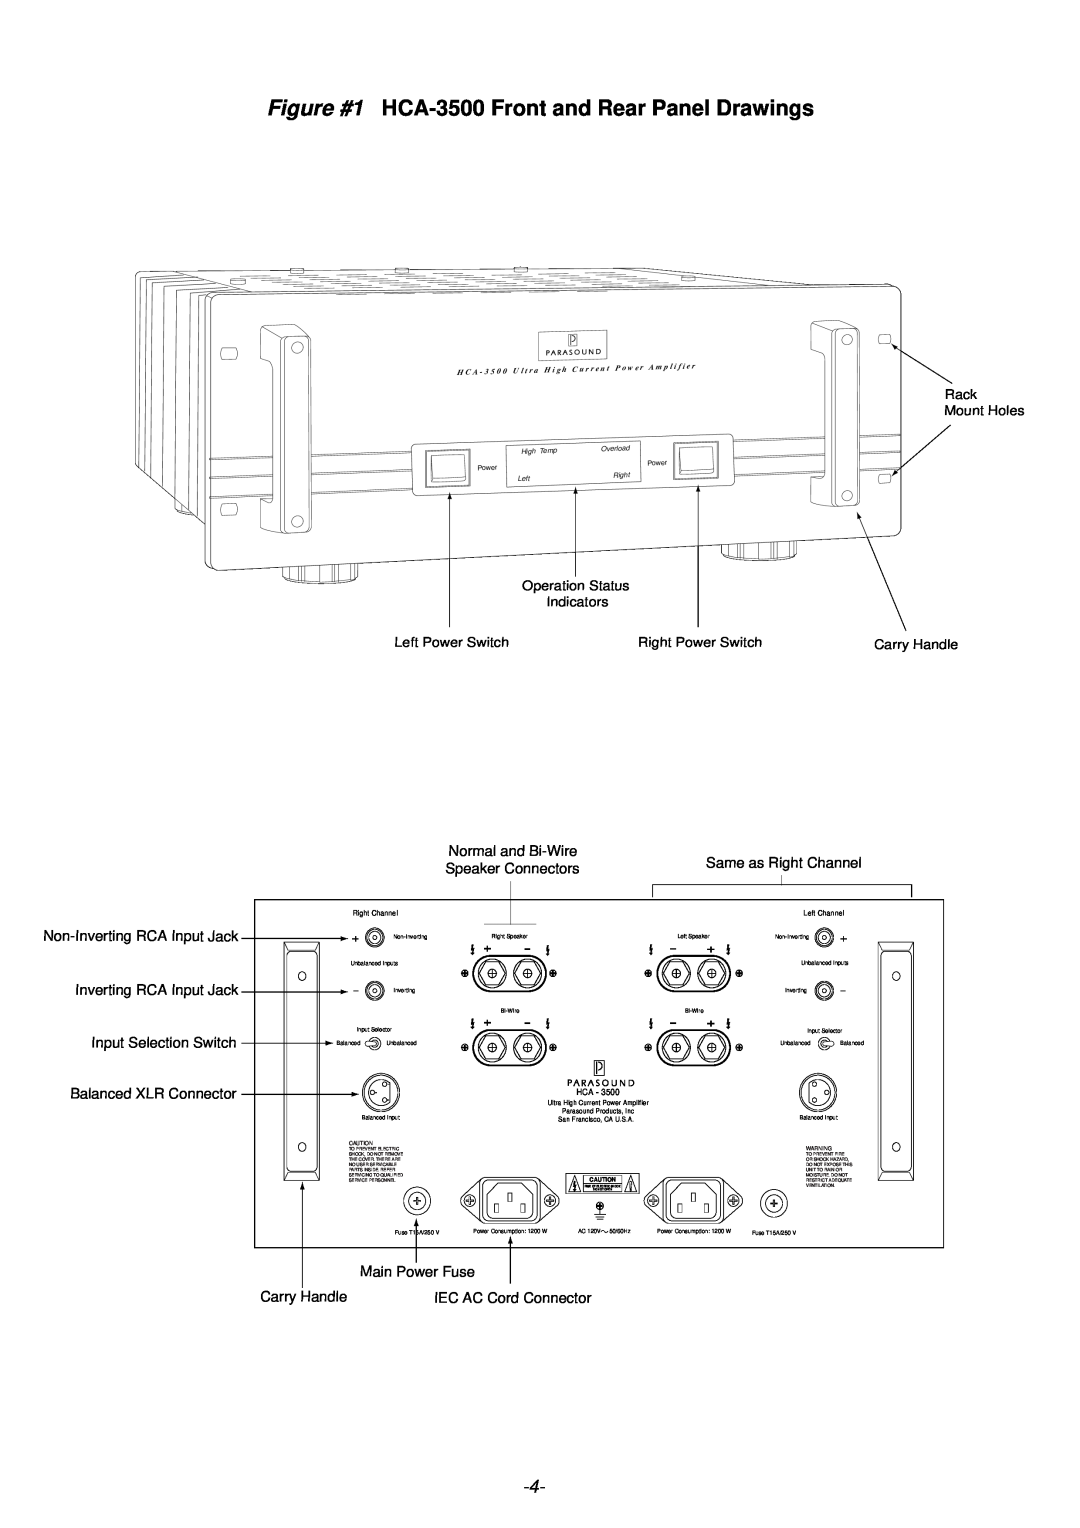 Parasound Figure #1 HCA-3500Front and Rear Panel Drawings, Same as Right Channel, Non-InvertingRCA Input Jack, Rack 